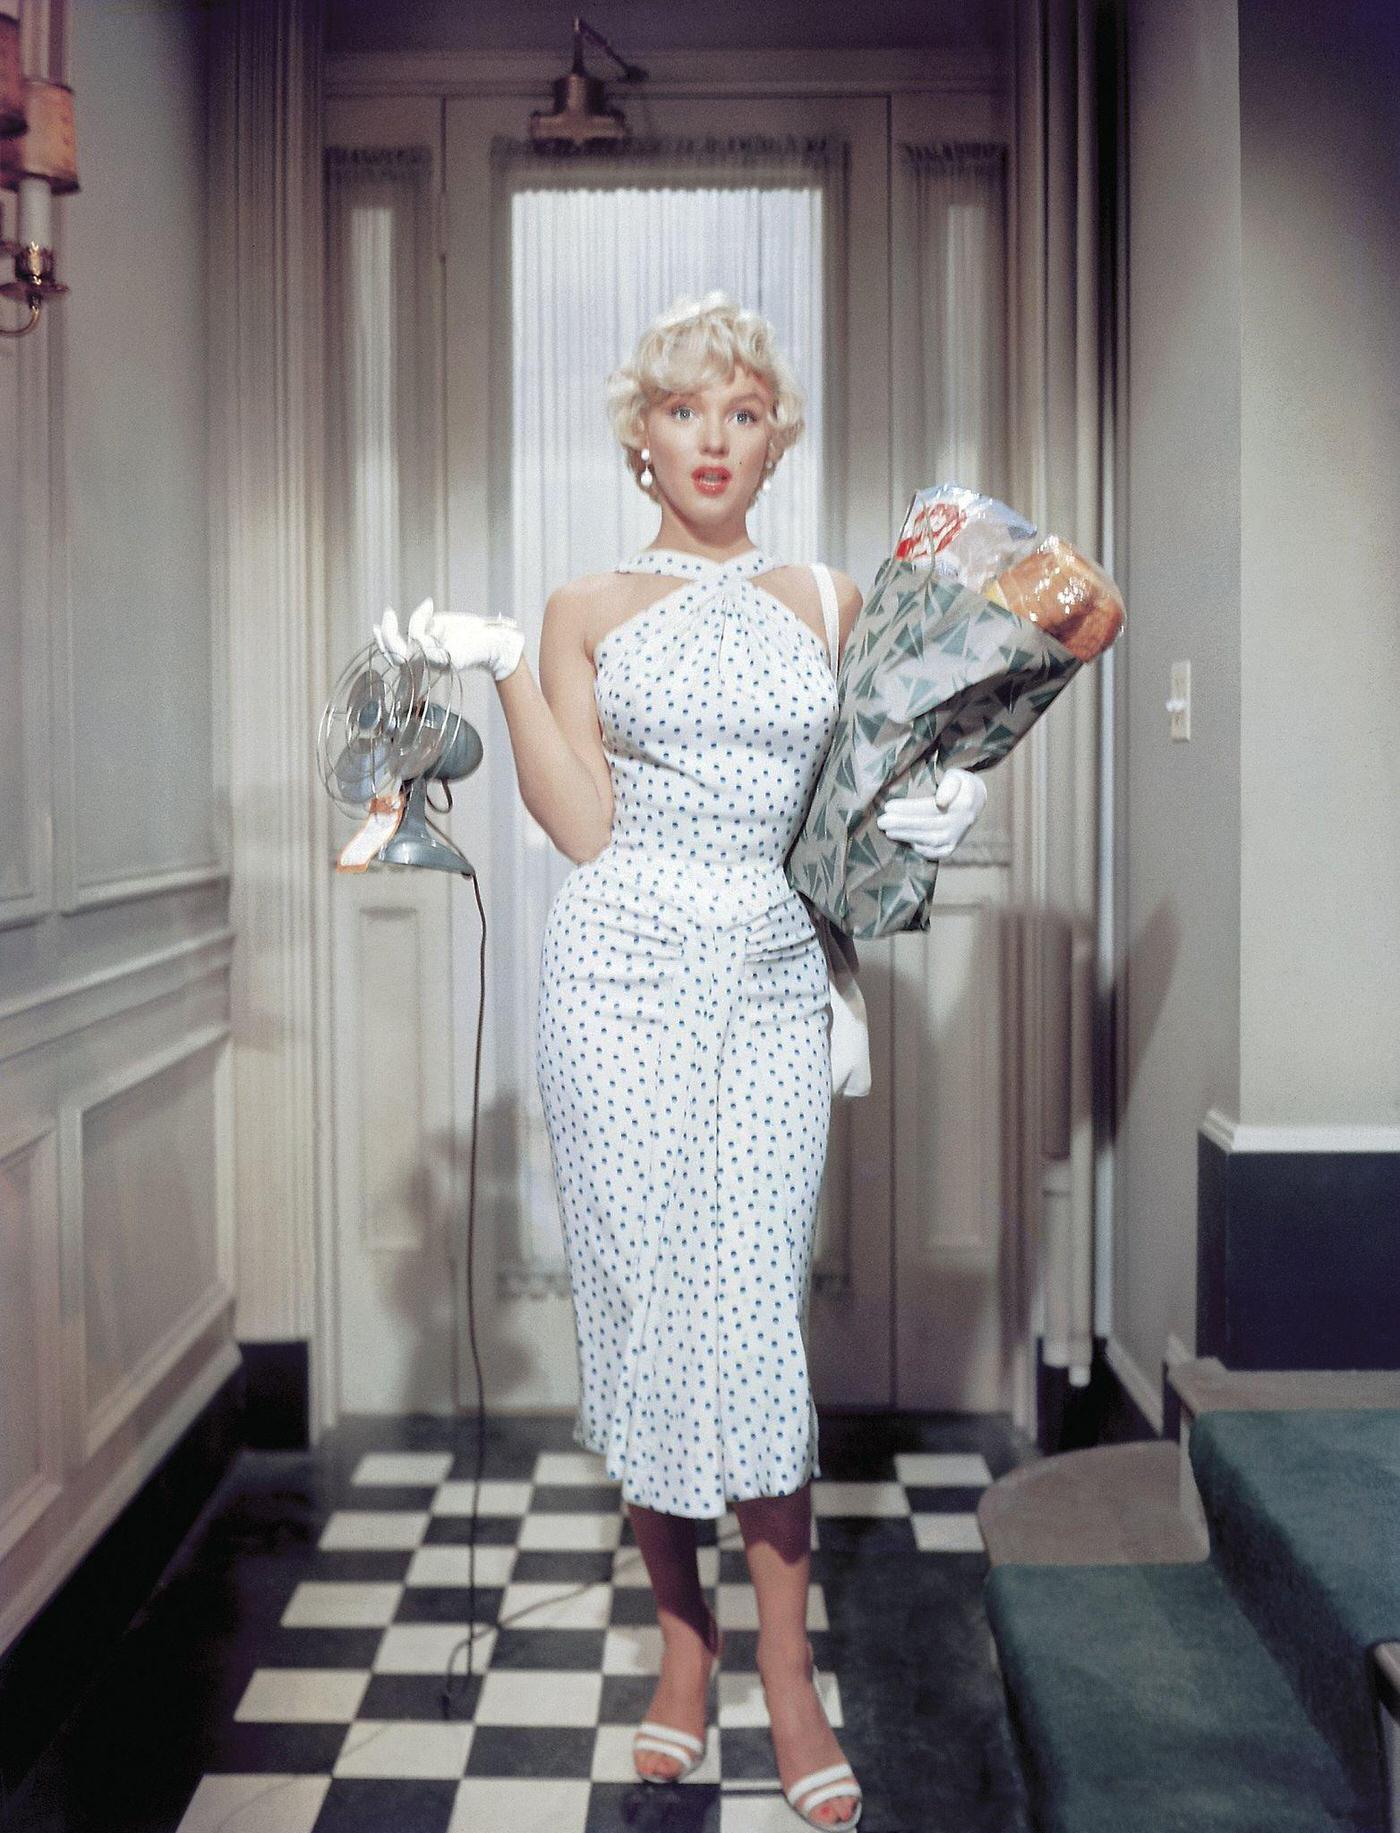 Marilyn Monroe leaning out of a window wearing a bathrobe in 1954 during the filming of "The Seven Year Itch"